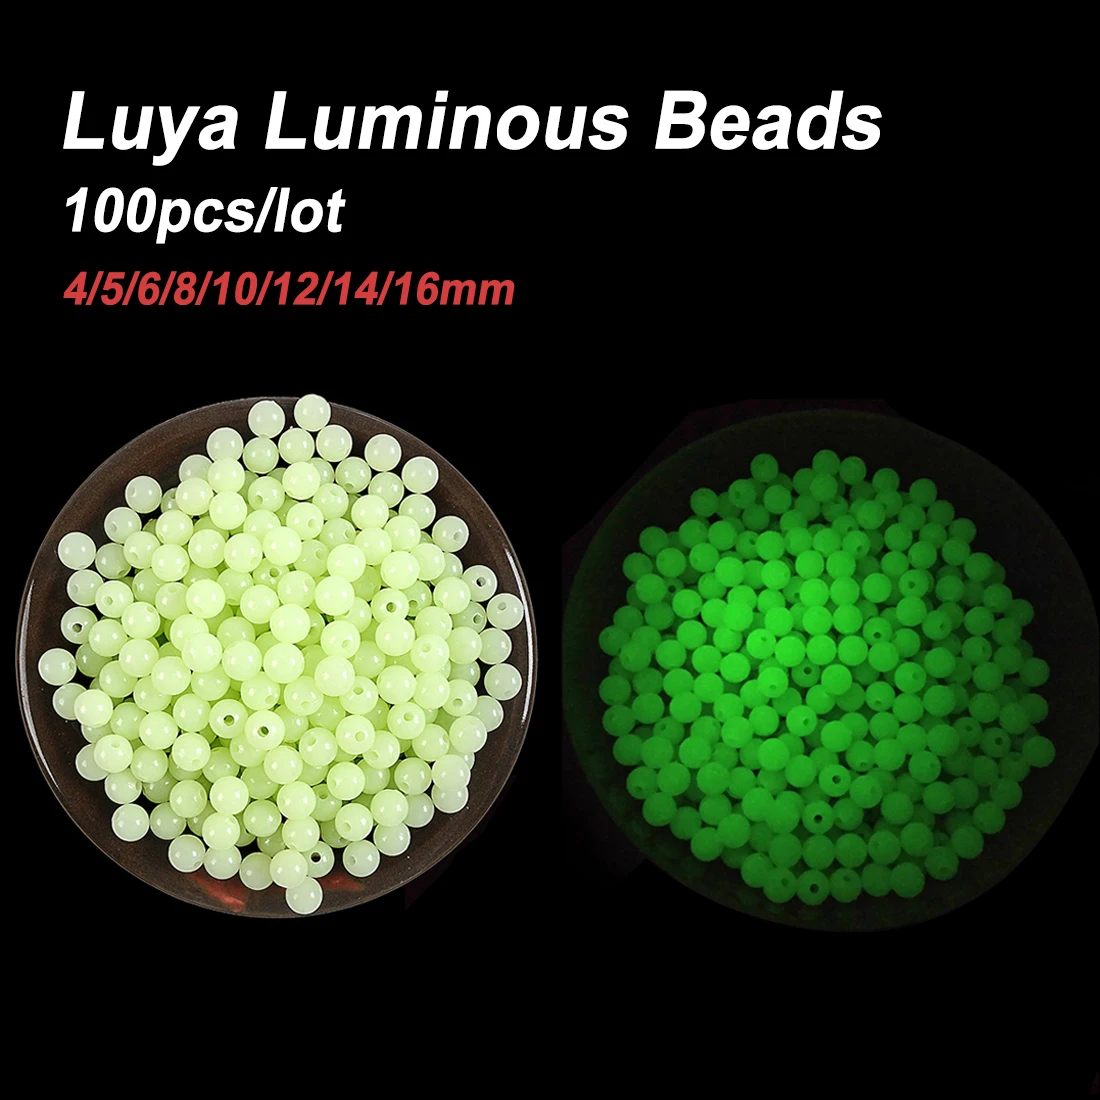 

100pcs/Lot Luminous Beads 4mm-16mm Luya Fishing Space Beans Round Float Balls Light Glowing for Outdoor Fishing Accessories Set